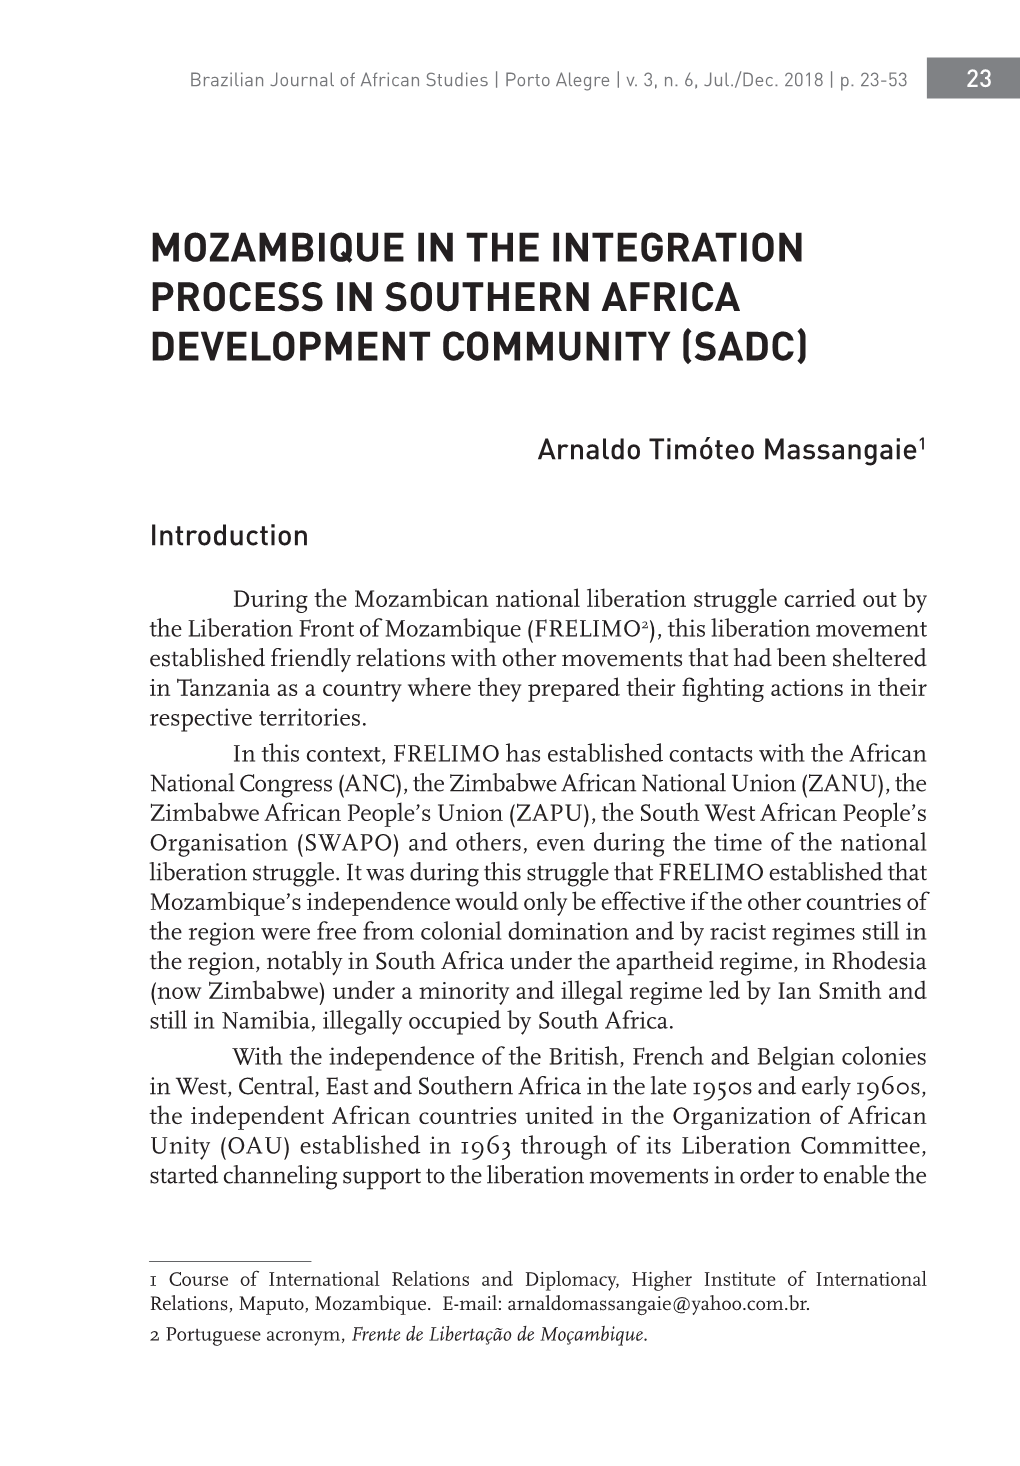 Mozambique in the Integration Process in Southern Africa Development Community (Sadc)